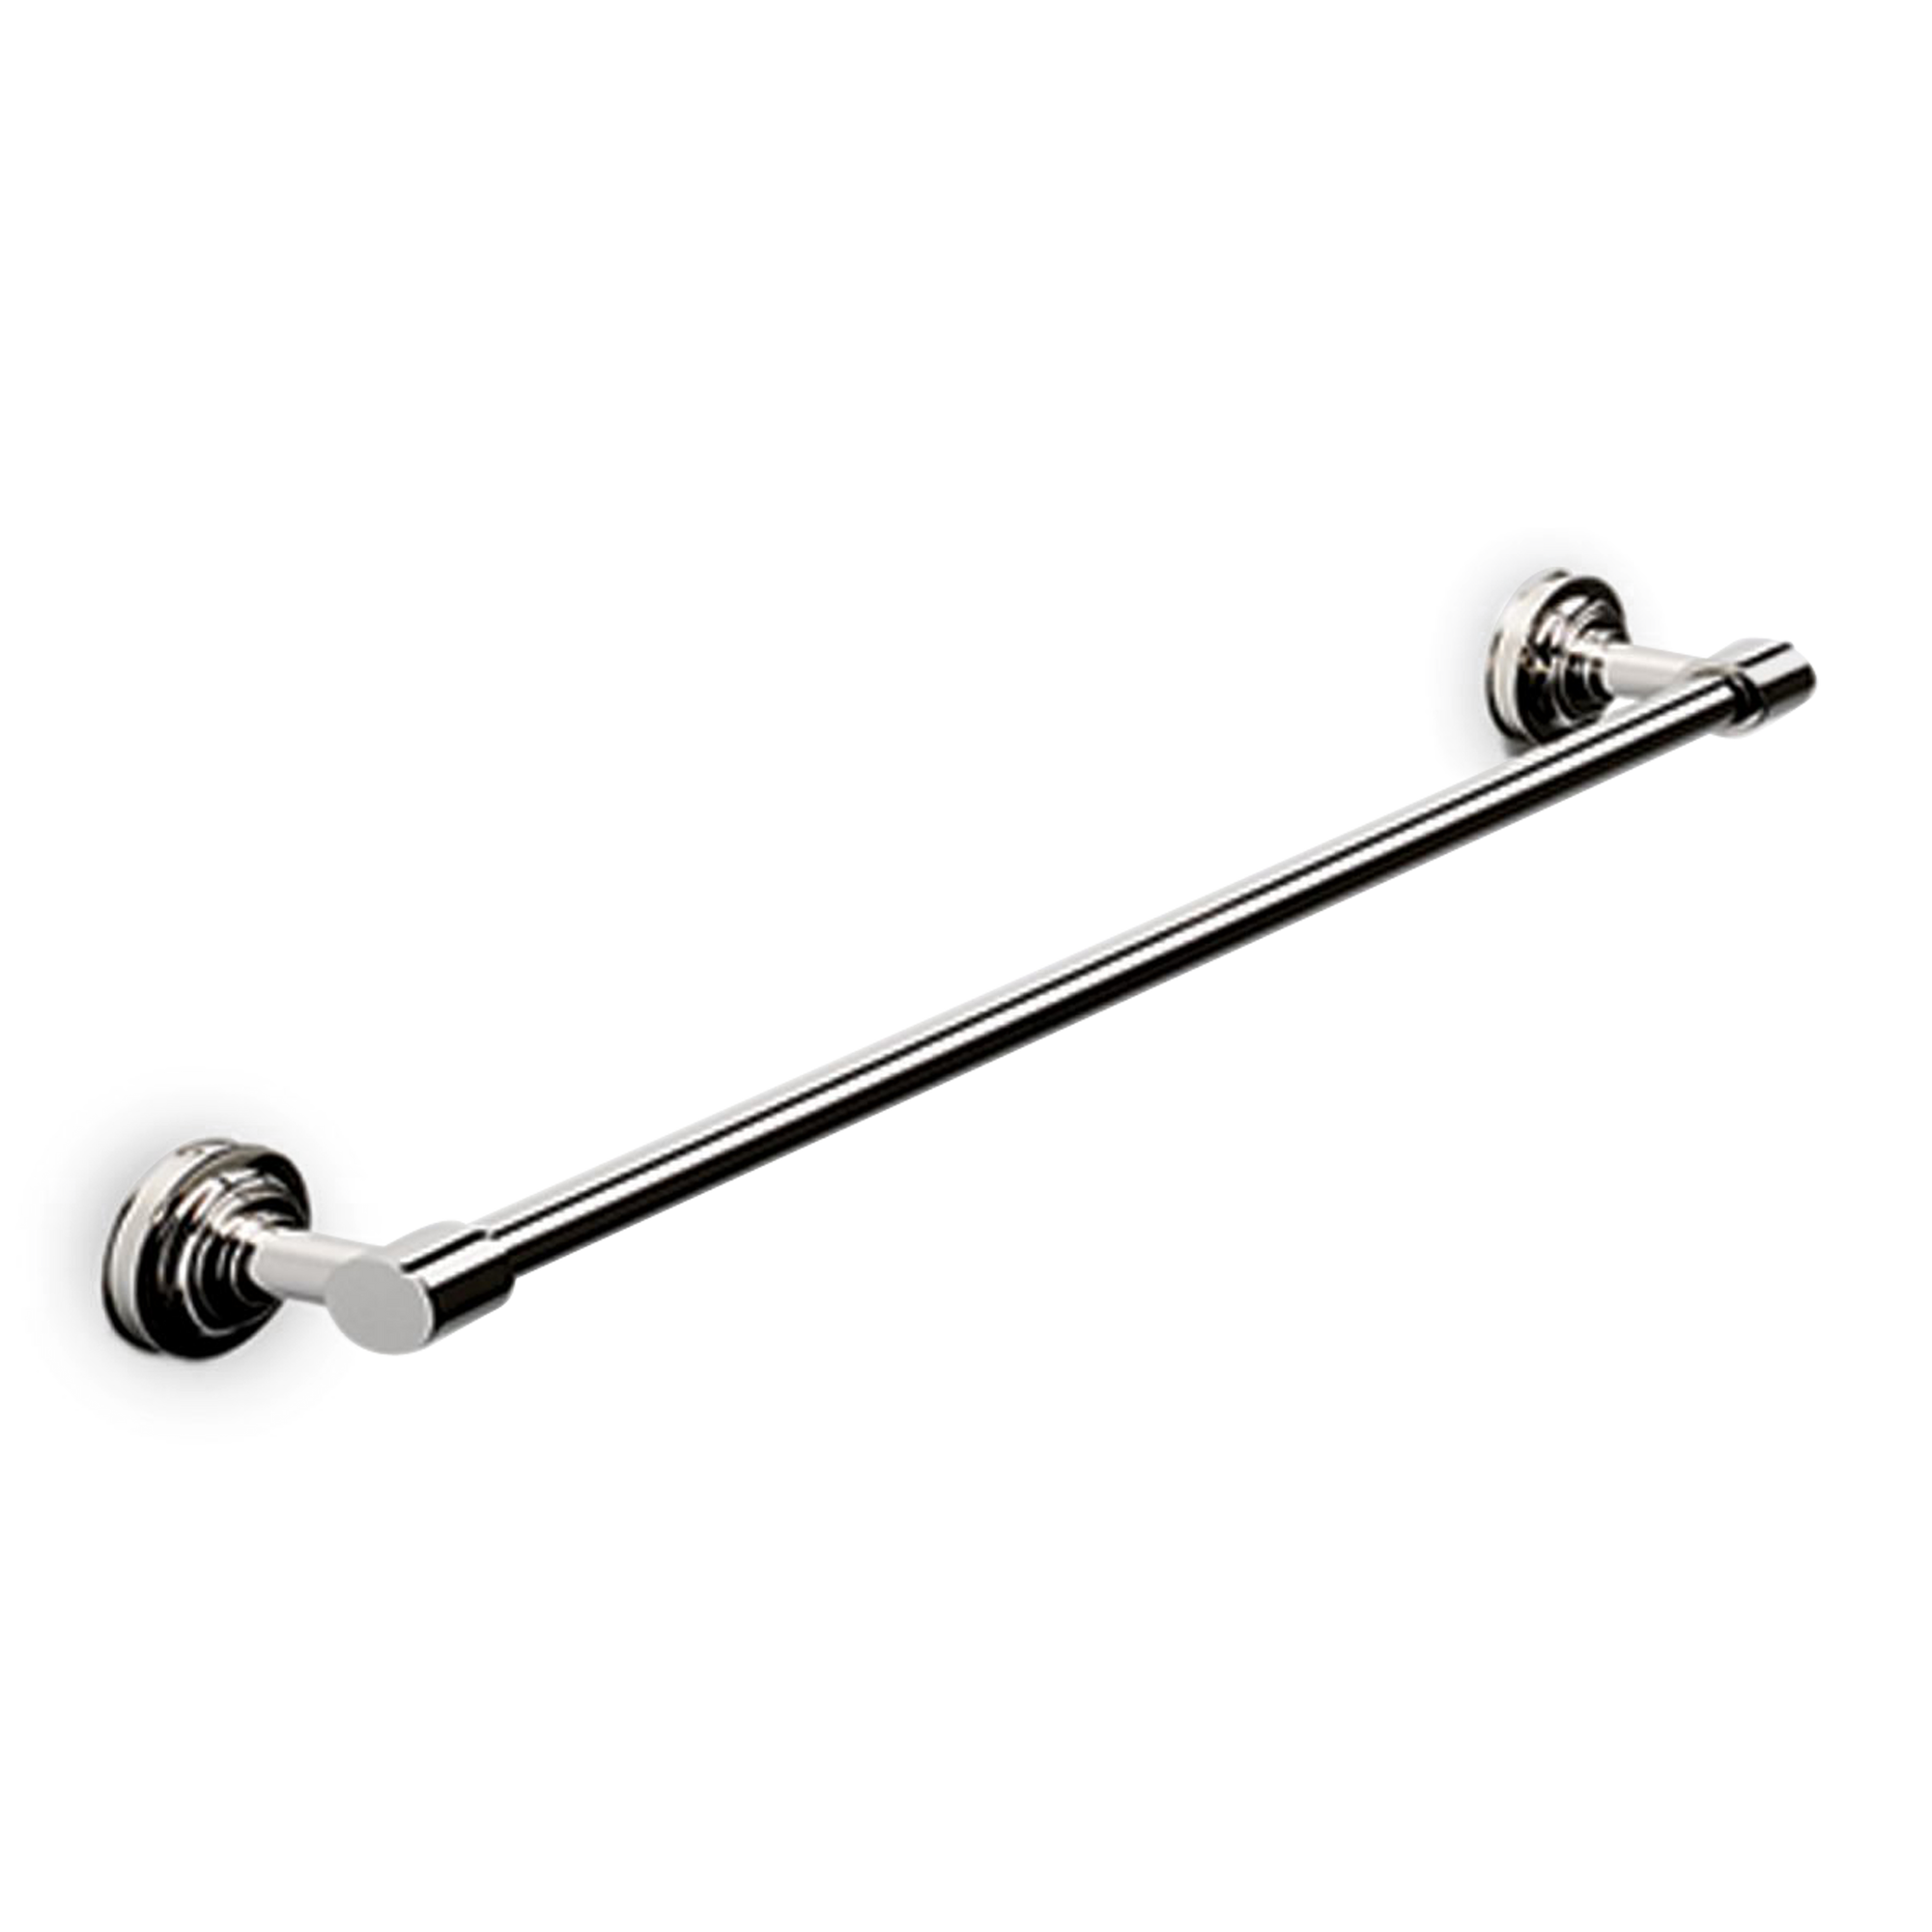 The Aero Towel Bar combines traditional elements with contemporary elegance to create a fresh and modern look.